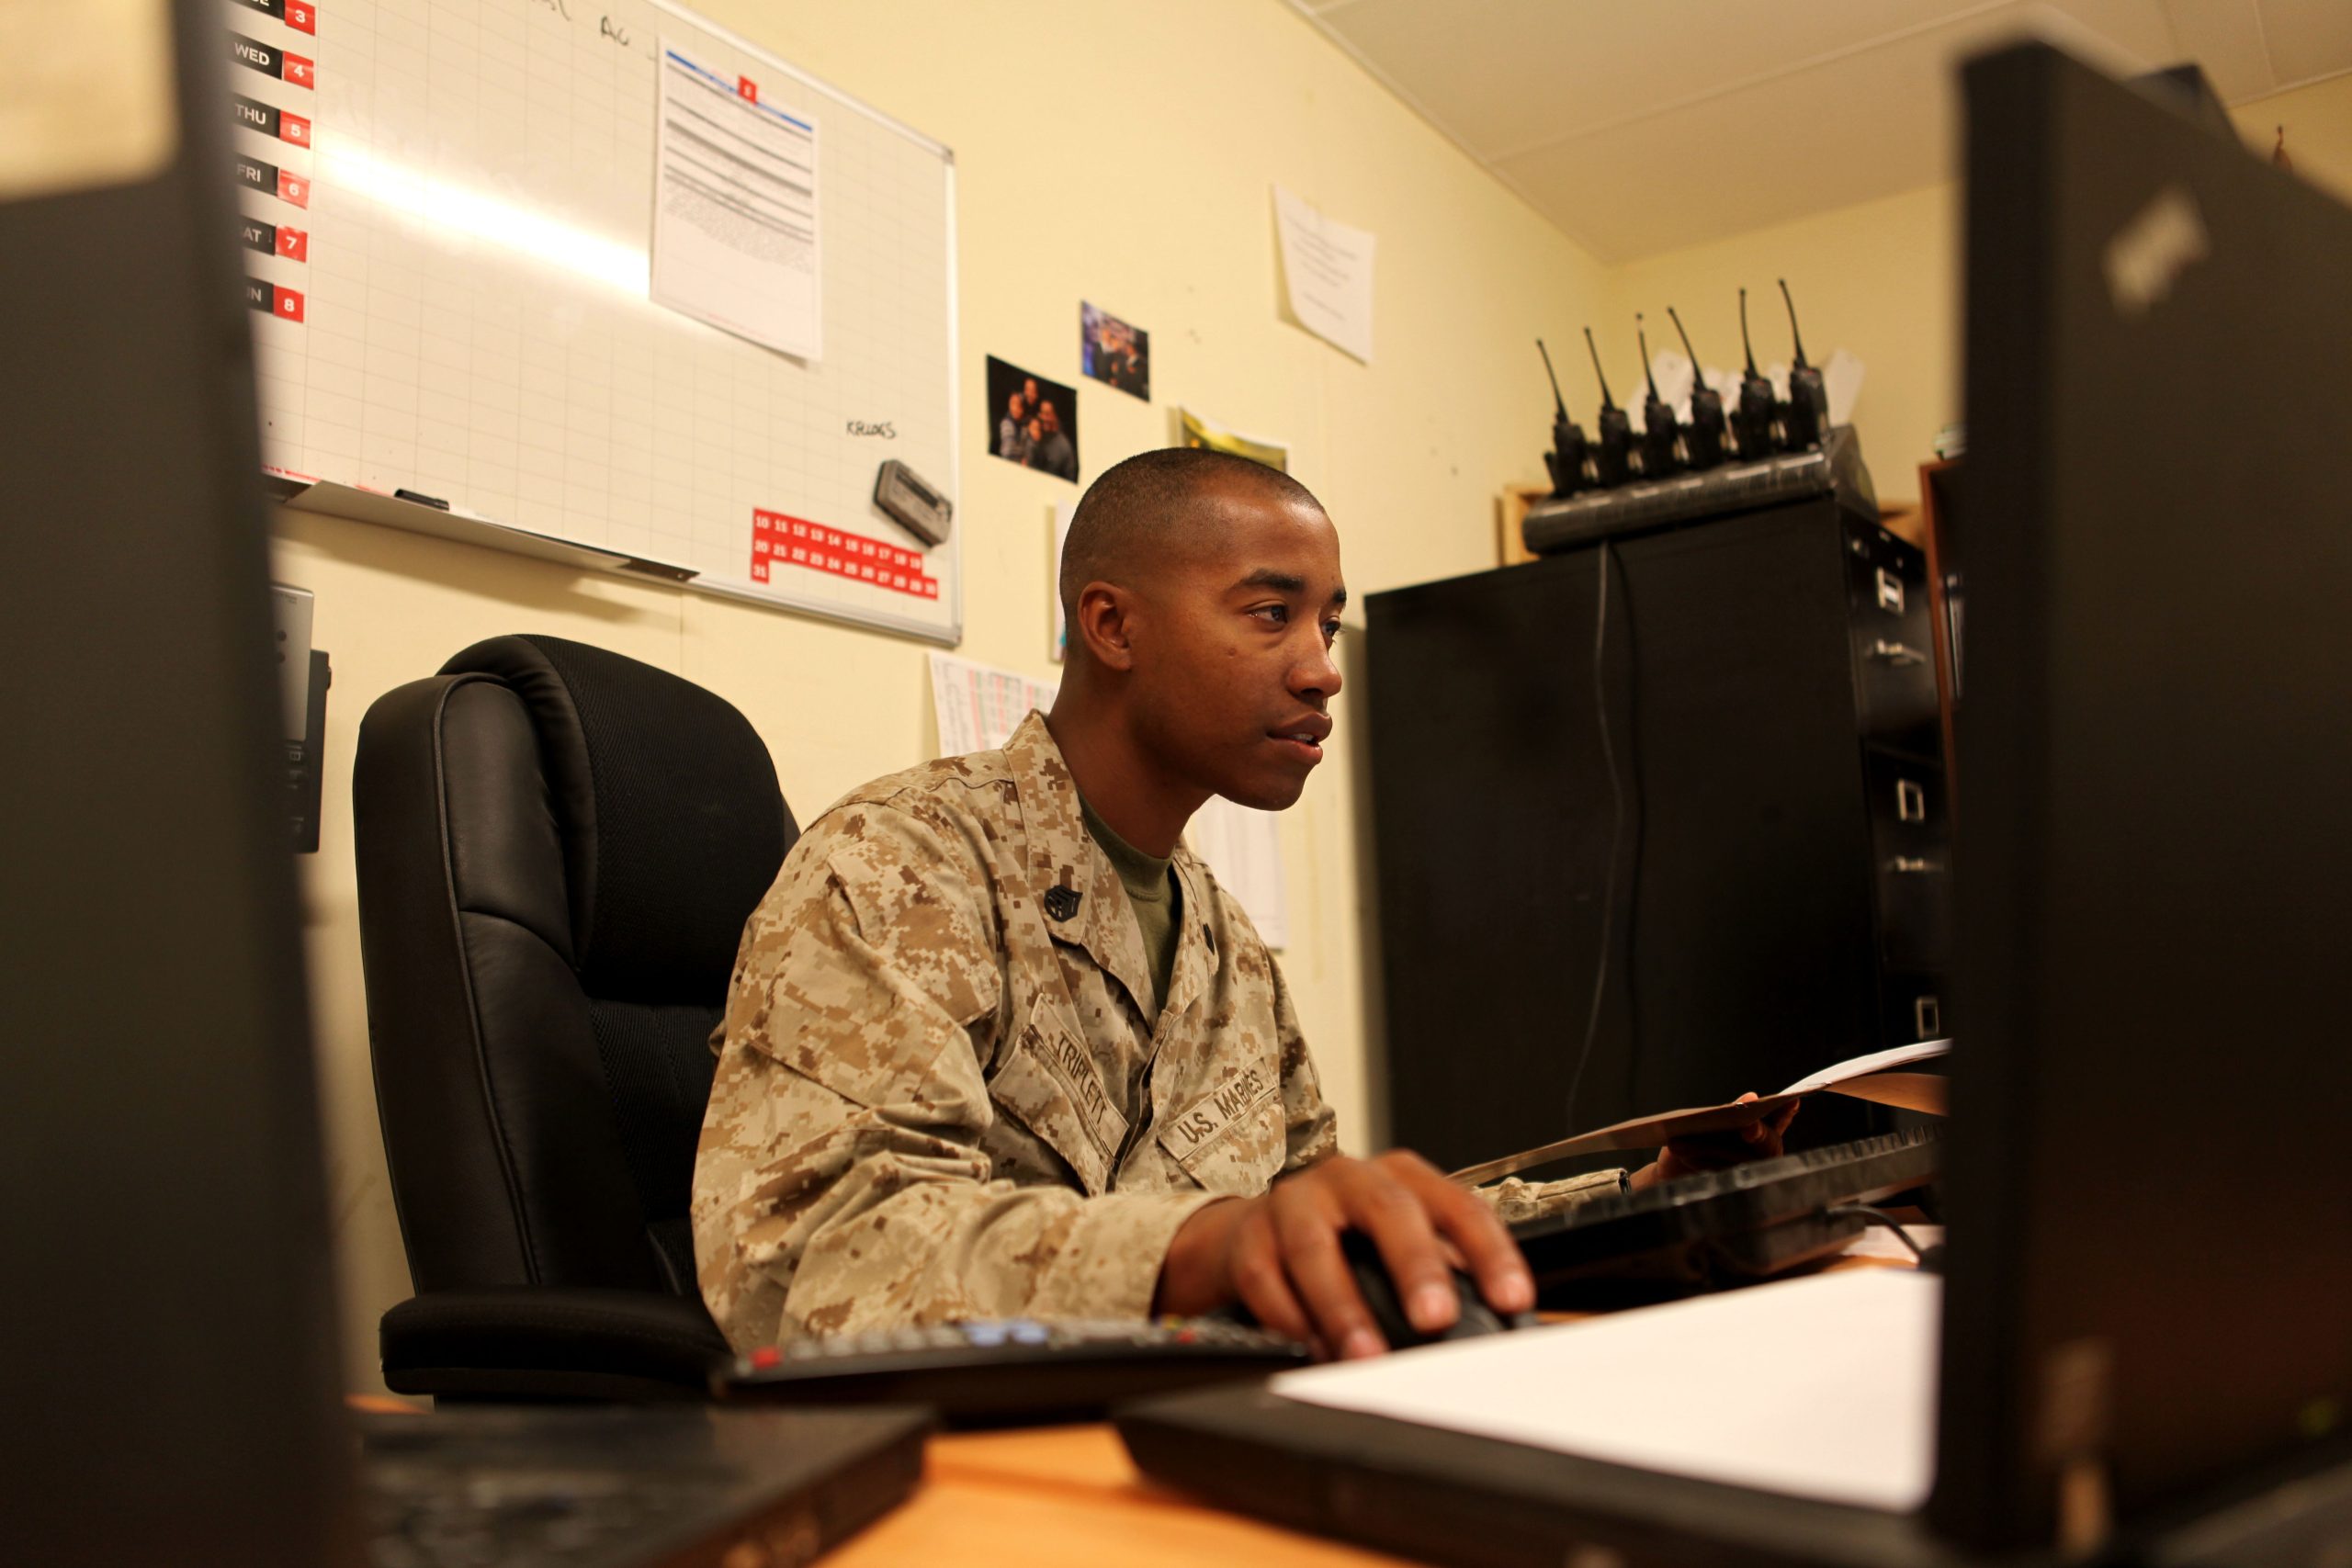 Starting April 1st, transitioning service members applying for compensation in BDD or IDES will be required to submit Part A Self-Assessment with application.